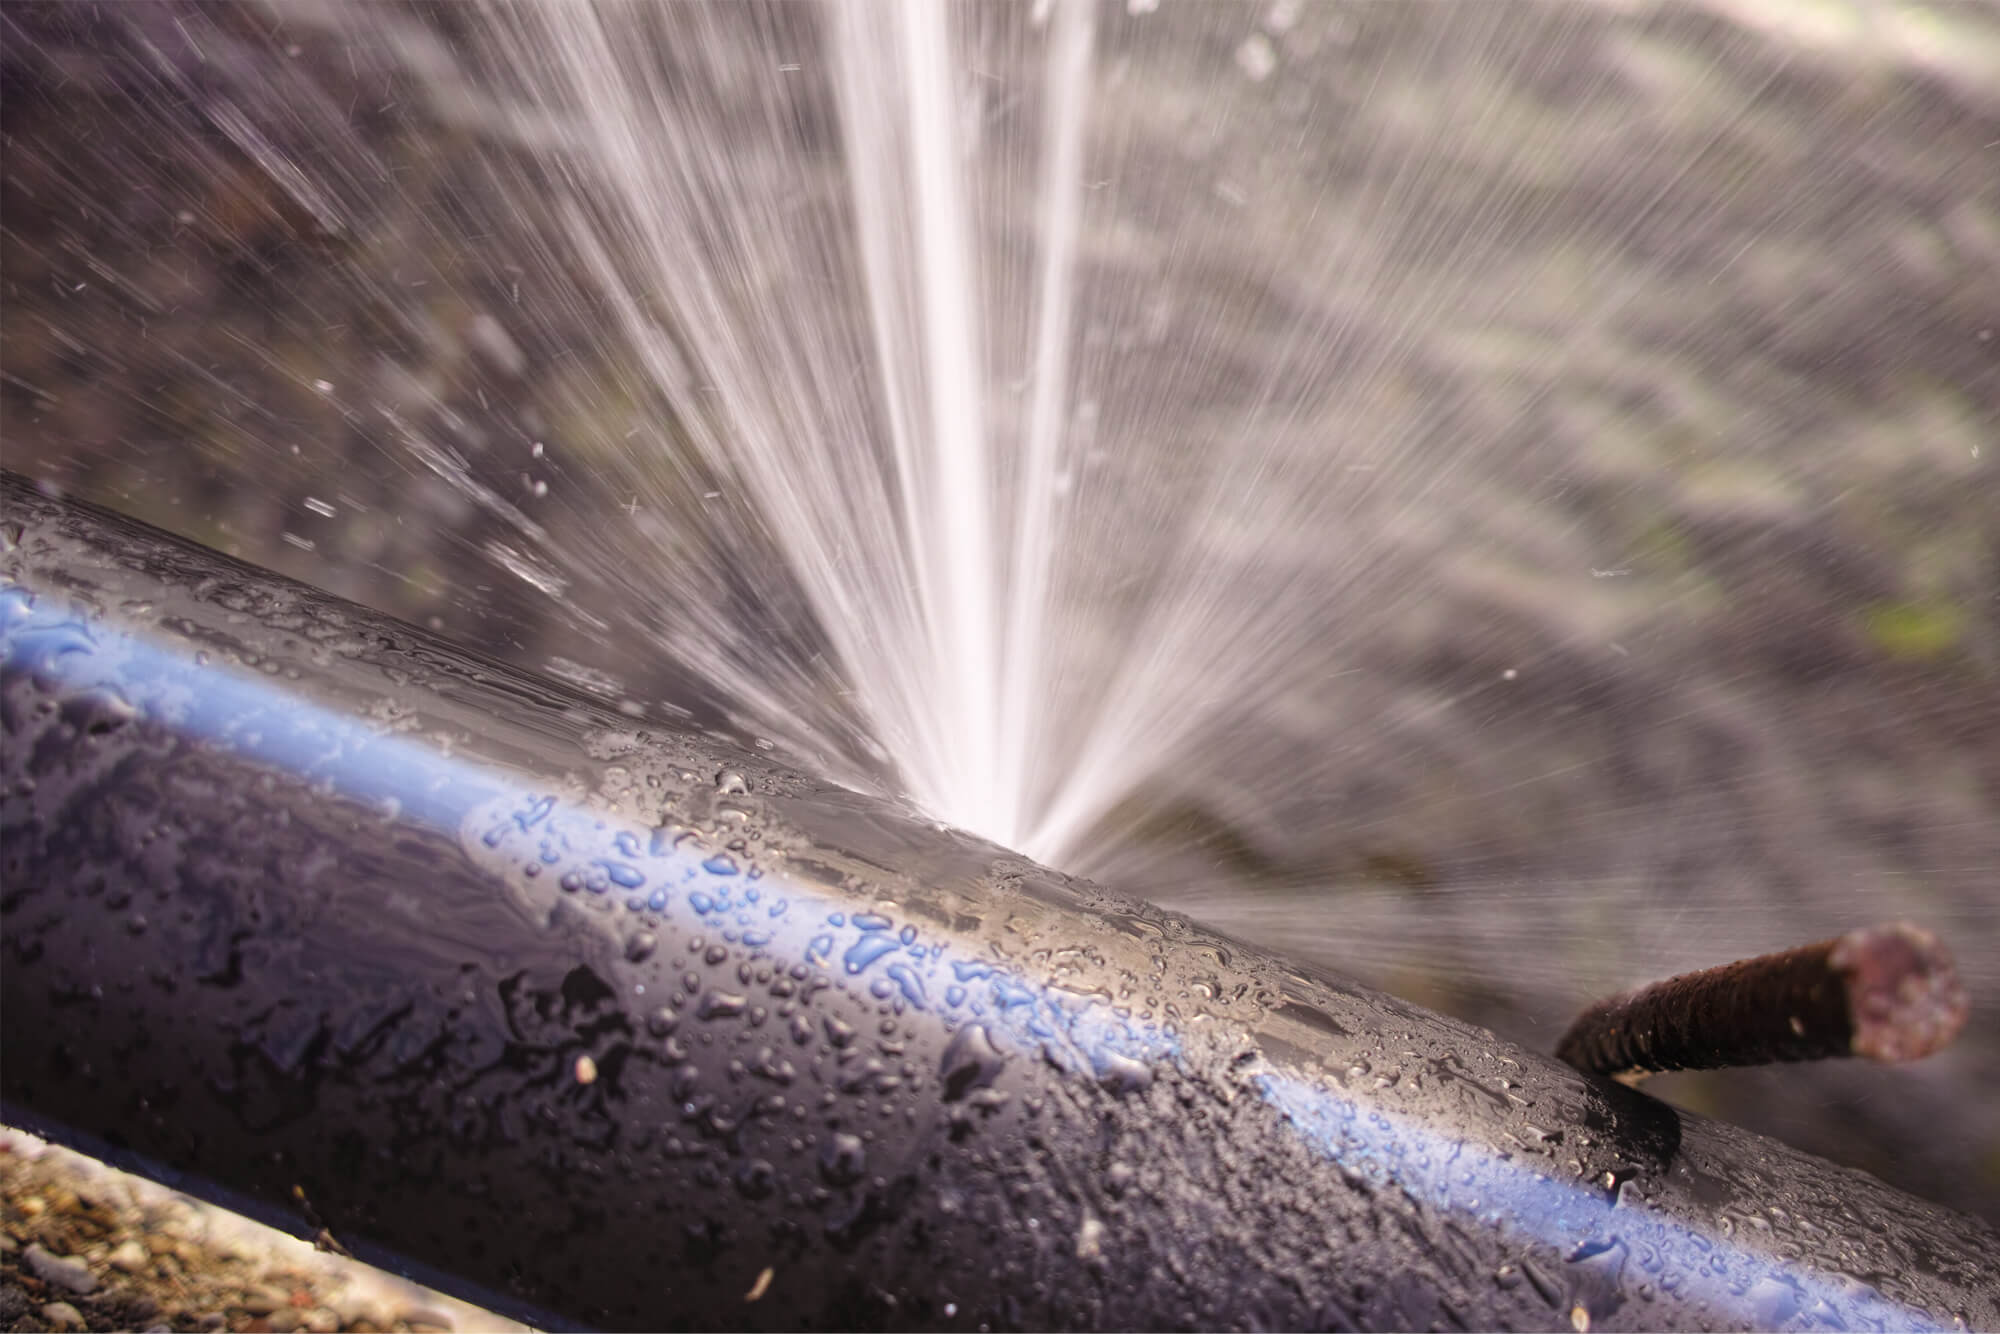 Metal pipe with a burst, spraying water